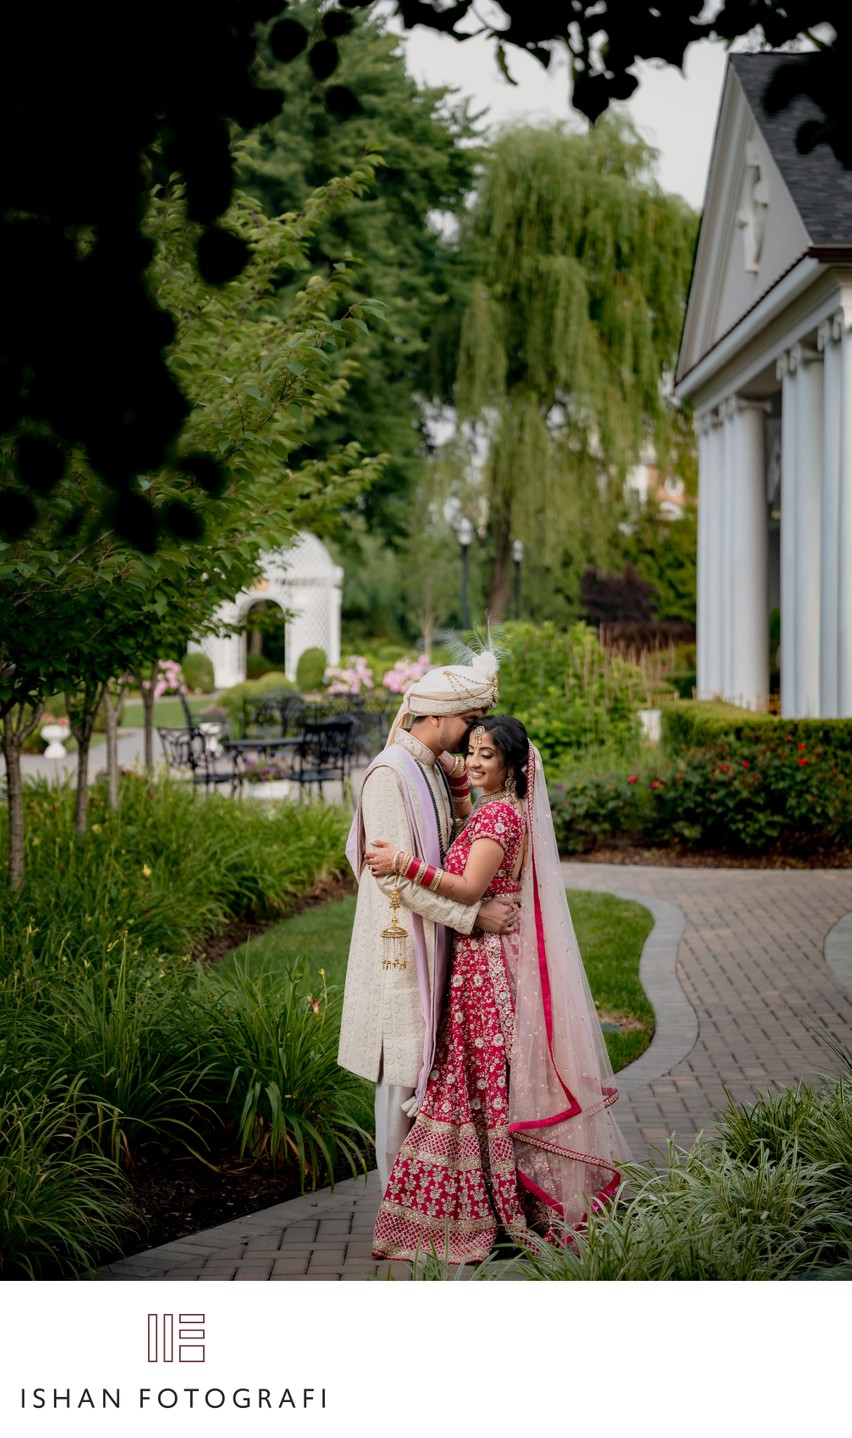 The Rockleigh indian wedding